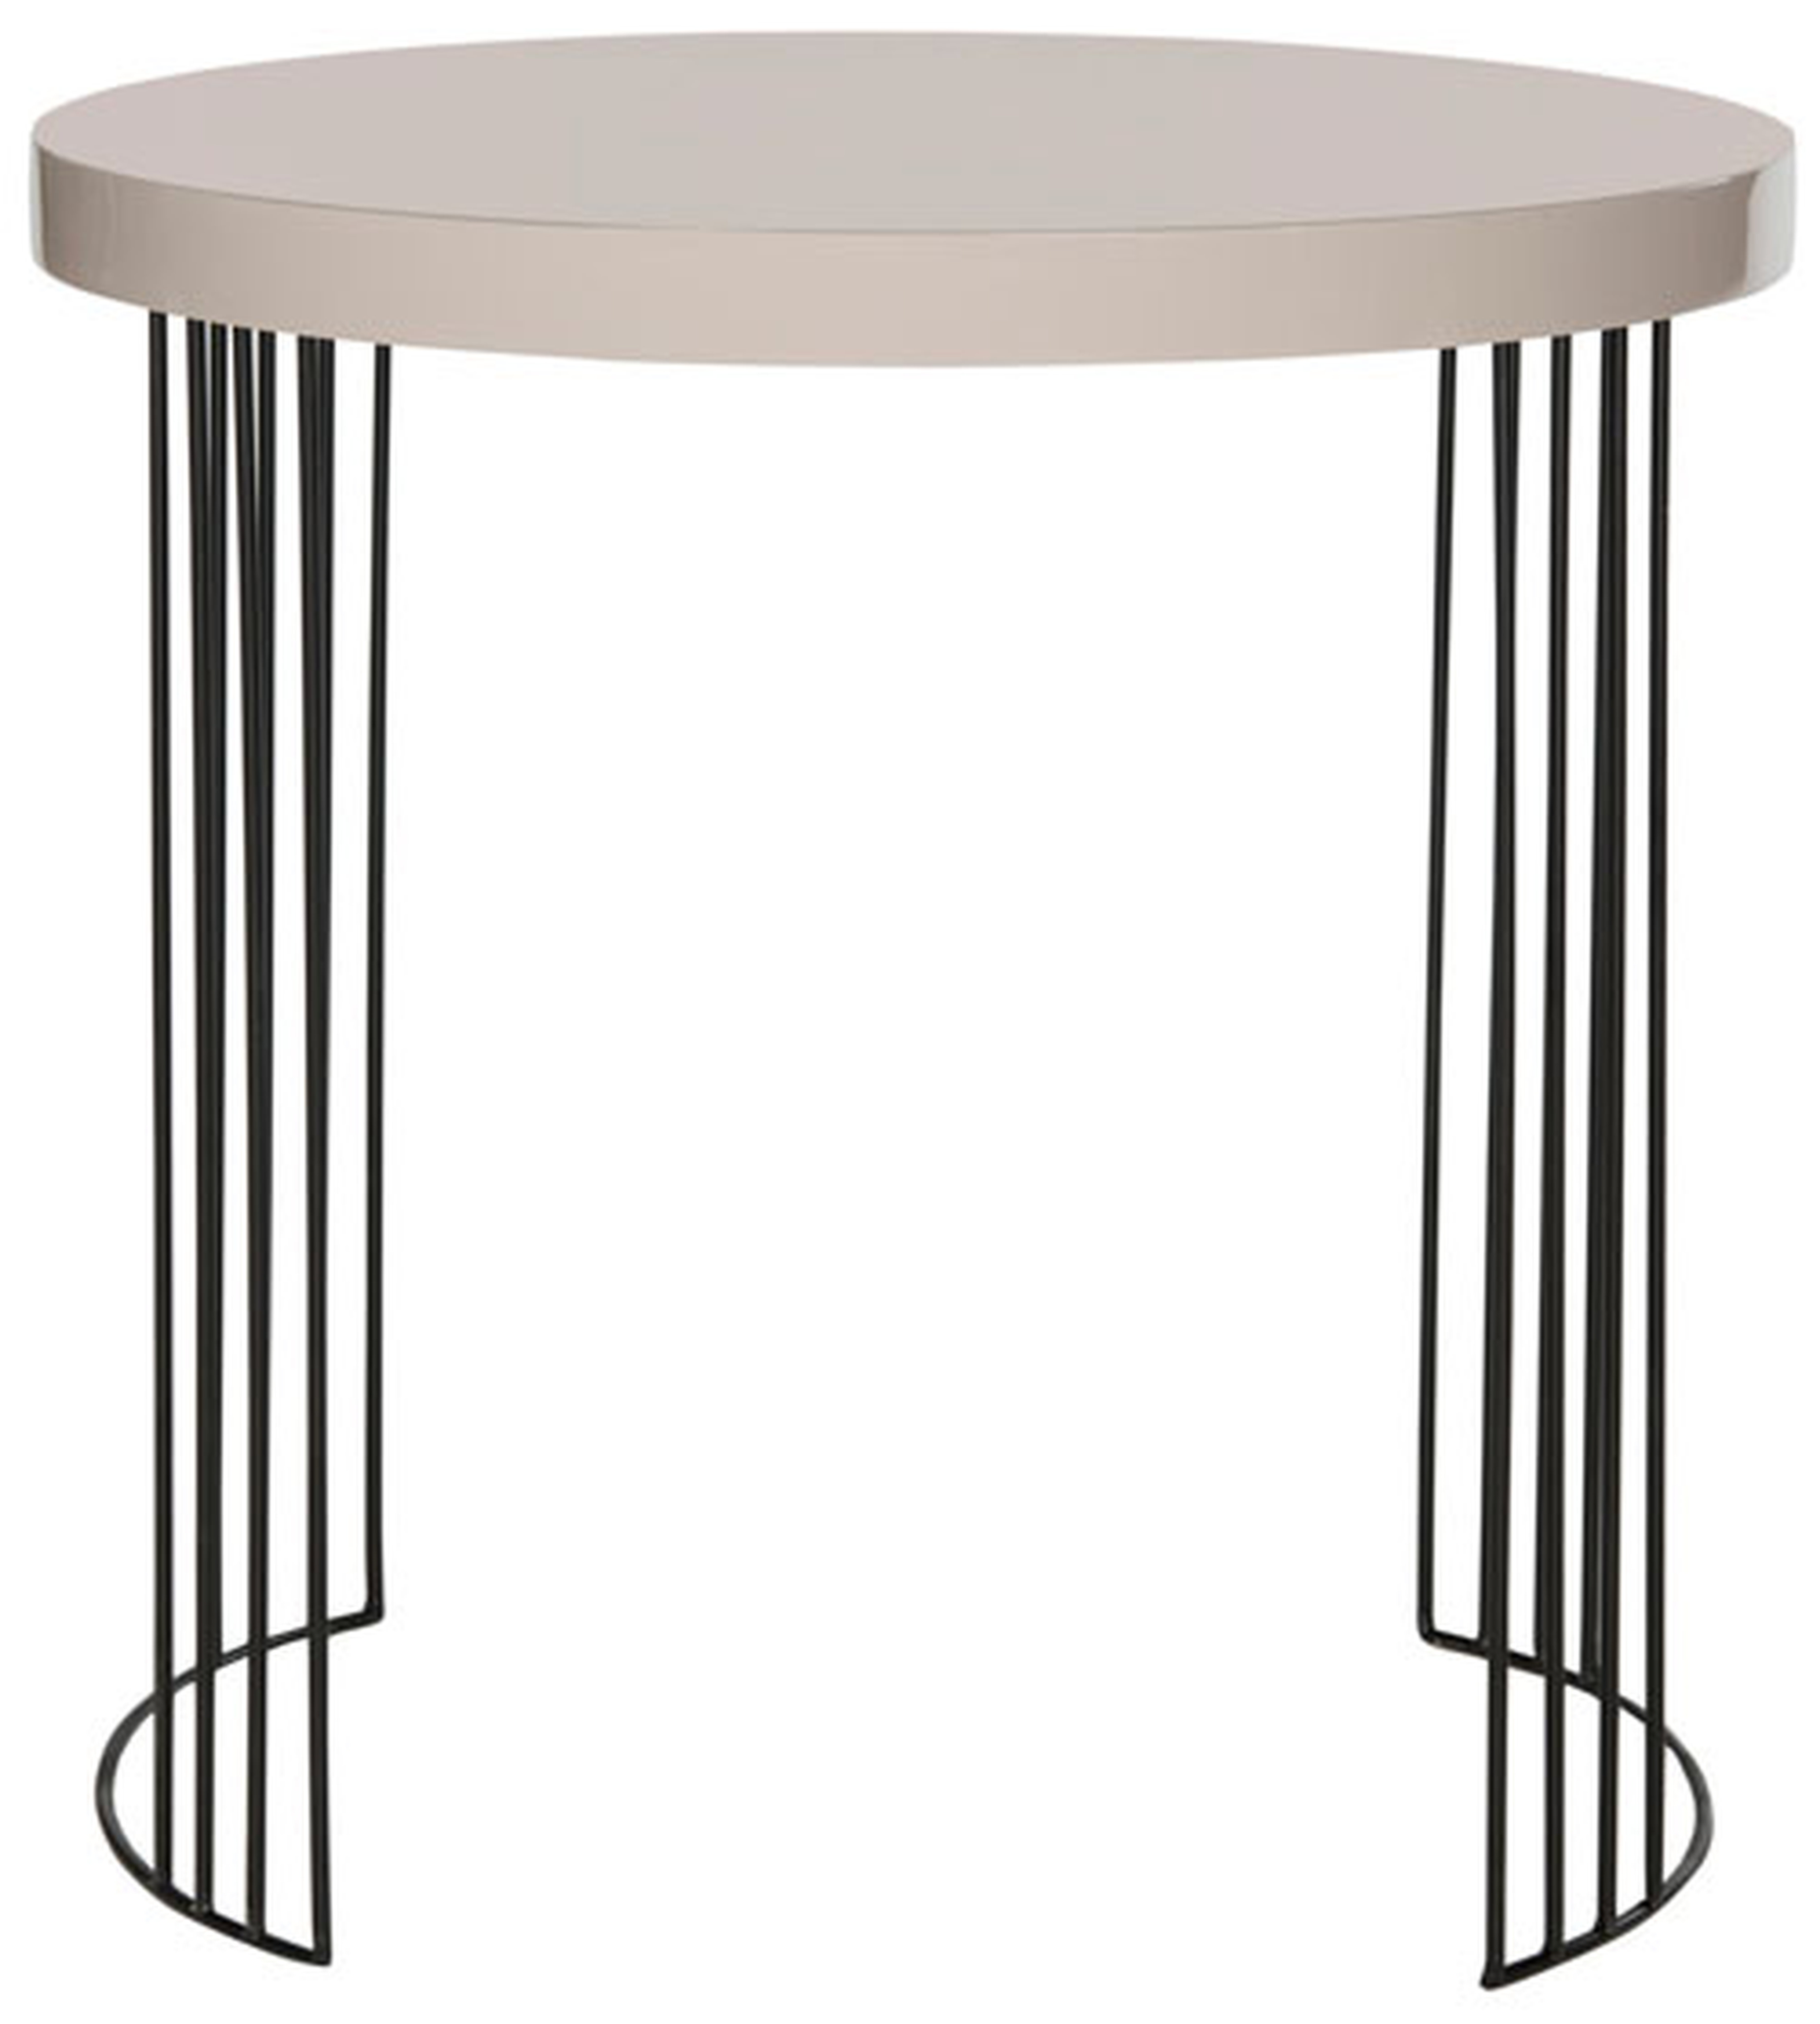 Kelly Mid Century Scandinavian Lacquer Side Table - Taupe/Black - Arlo Home - Arlo Home